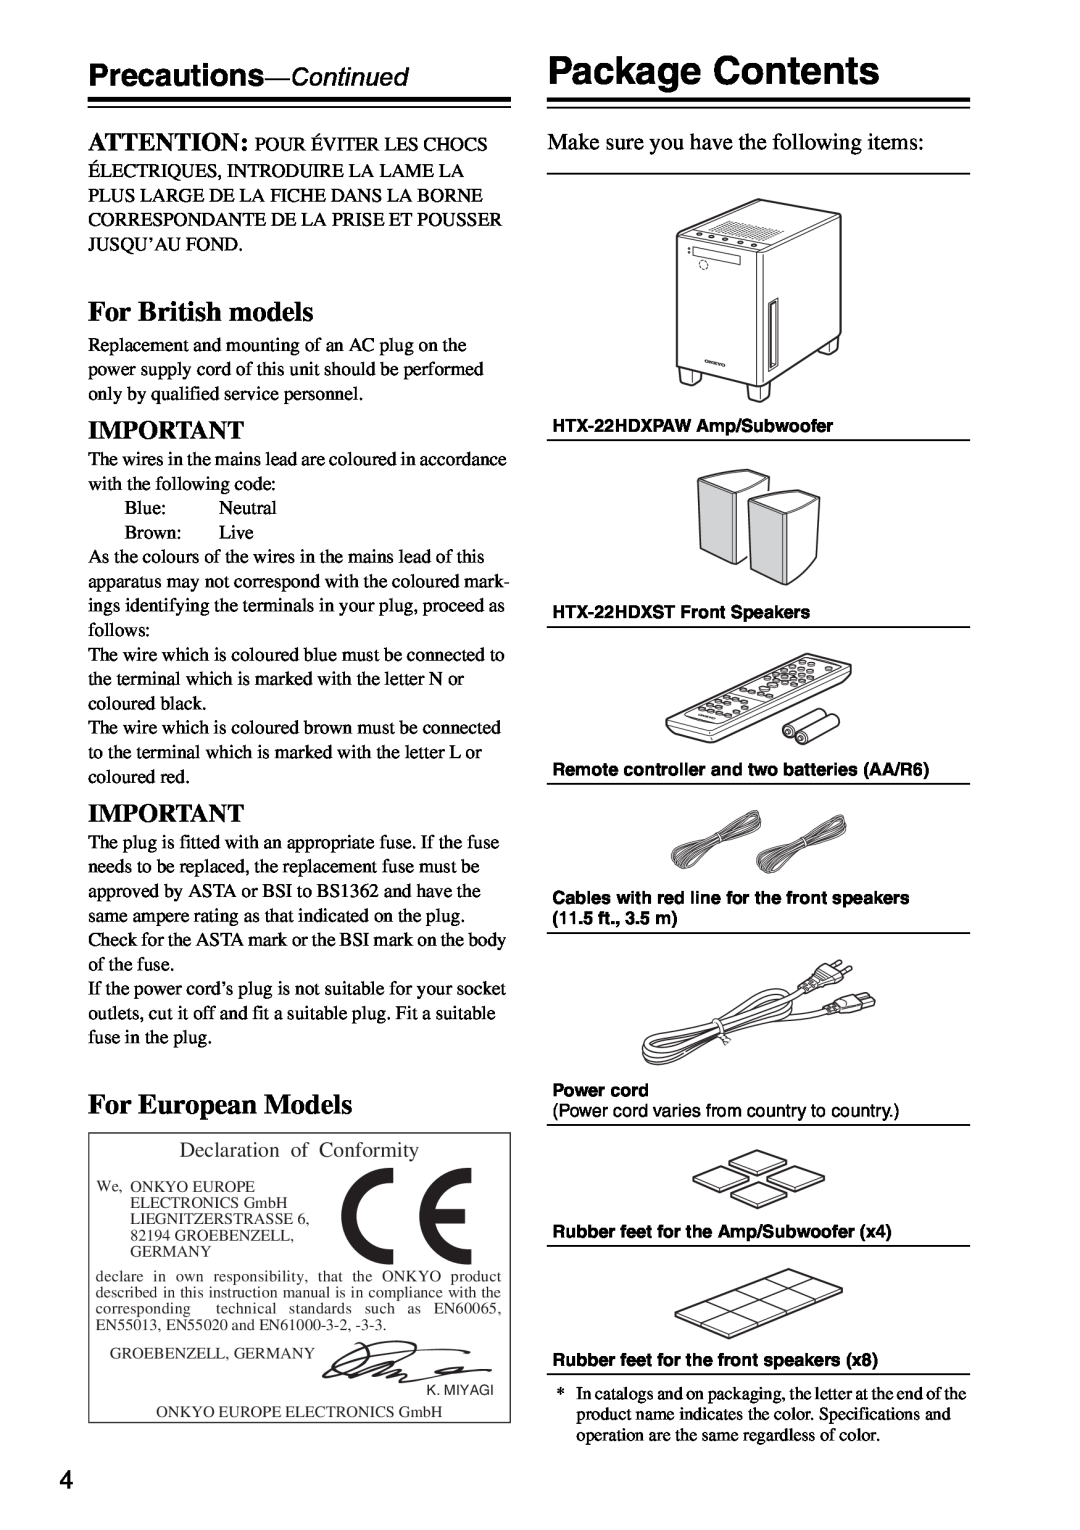 Onkyo HTX-22HDXPAW, HTX-22HDXST Package Contents, Precautions-Continued, For British models, For European Models 